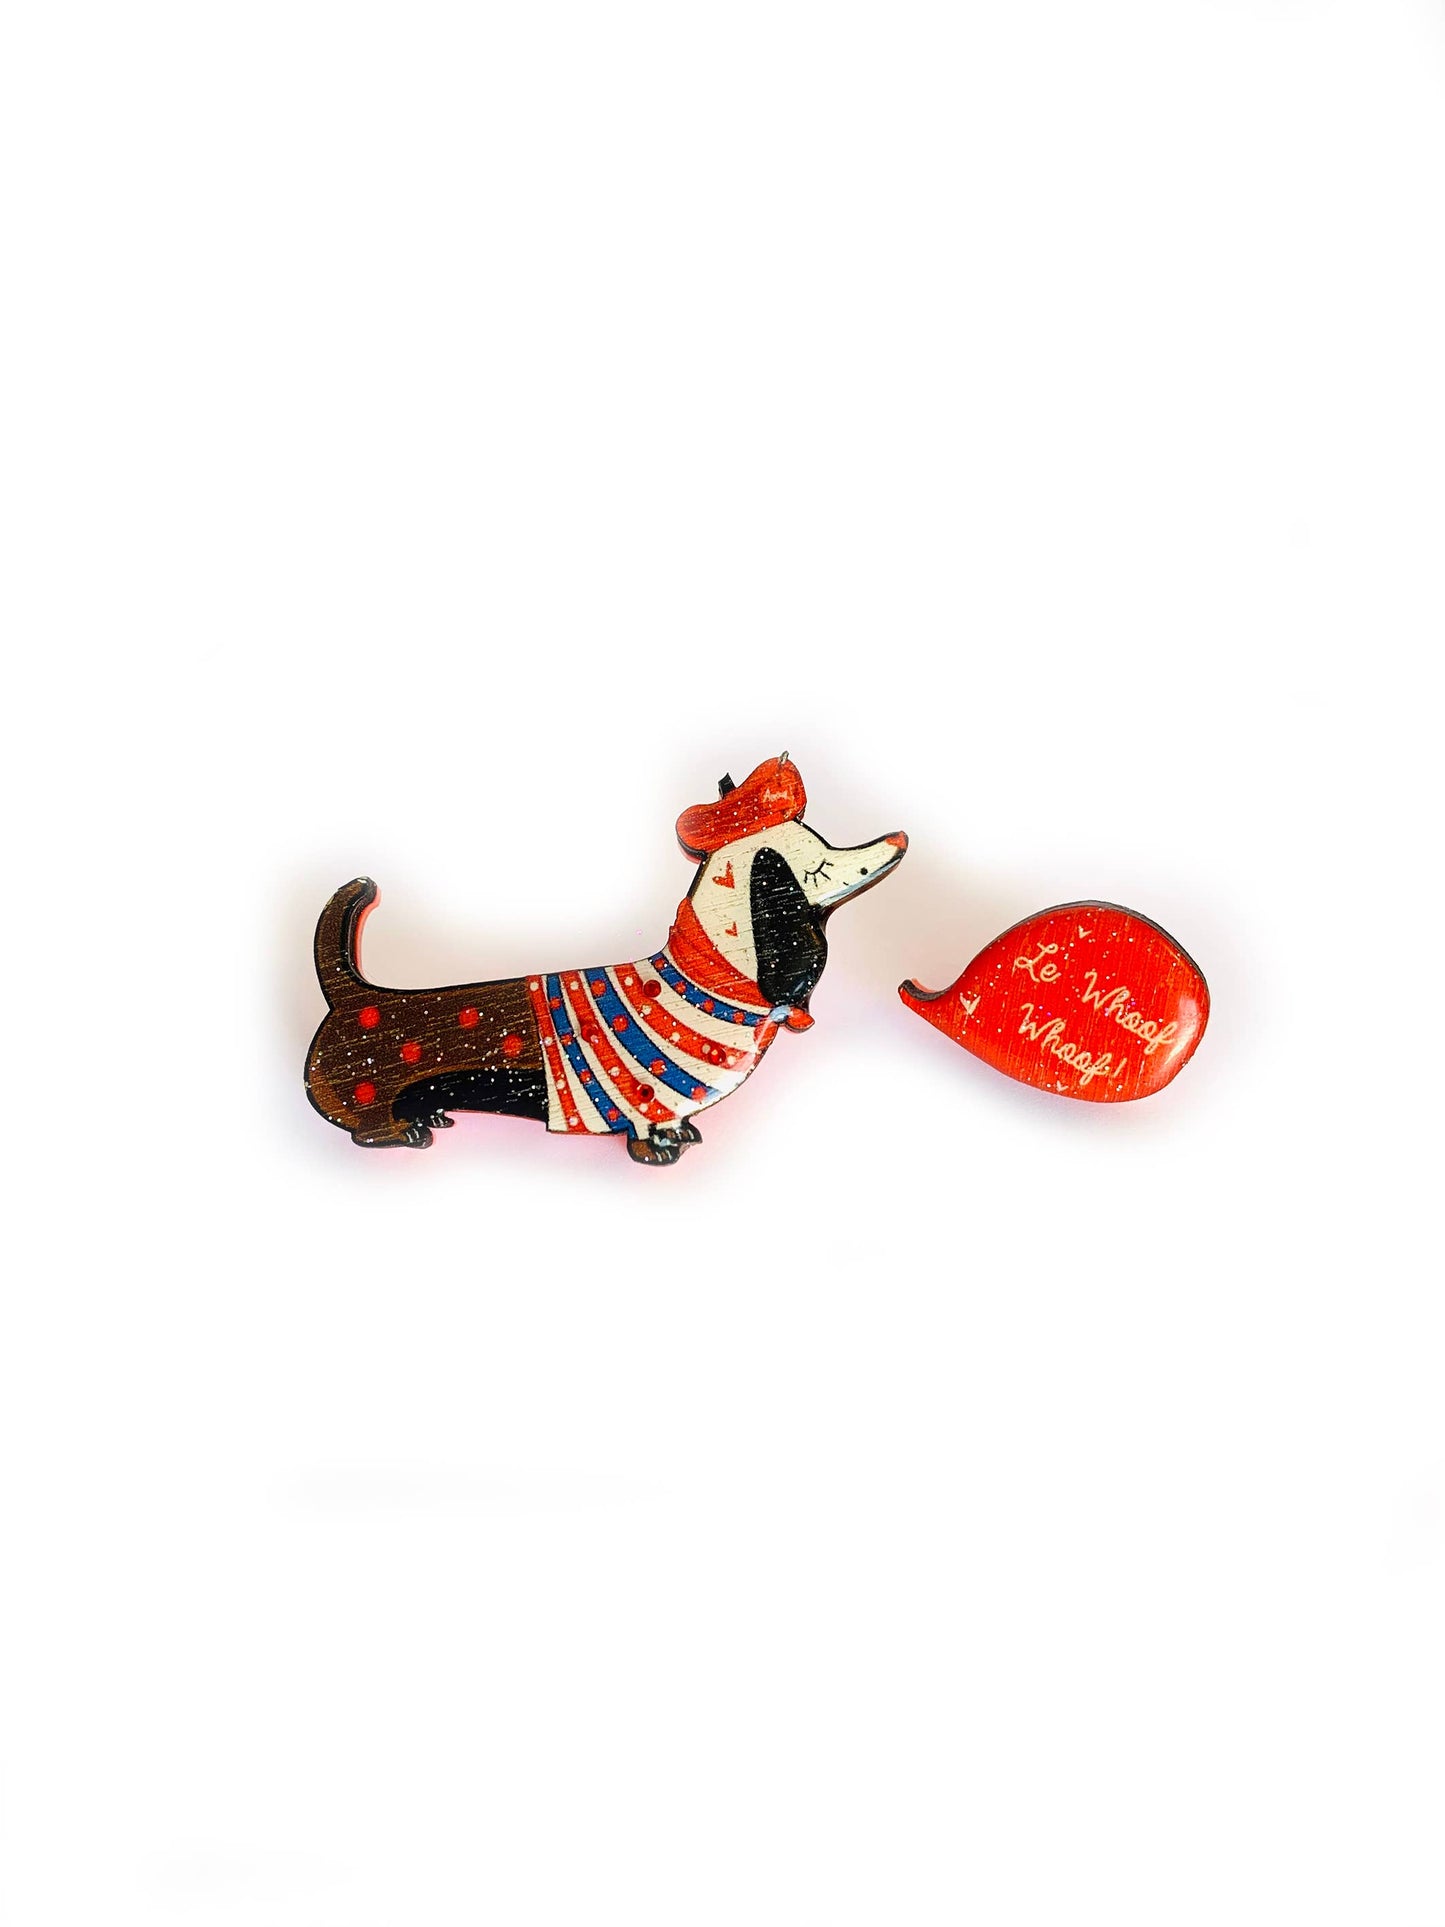 Pierre the french sausage dog brooch - Le Whoof Whoof